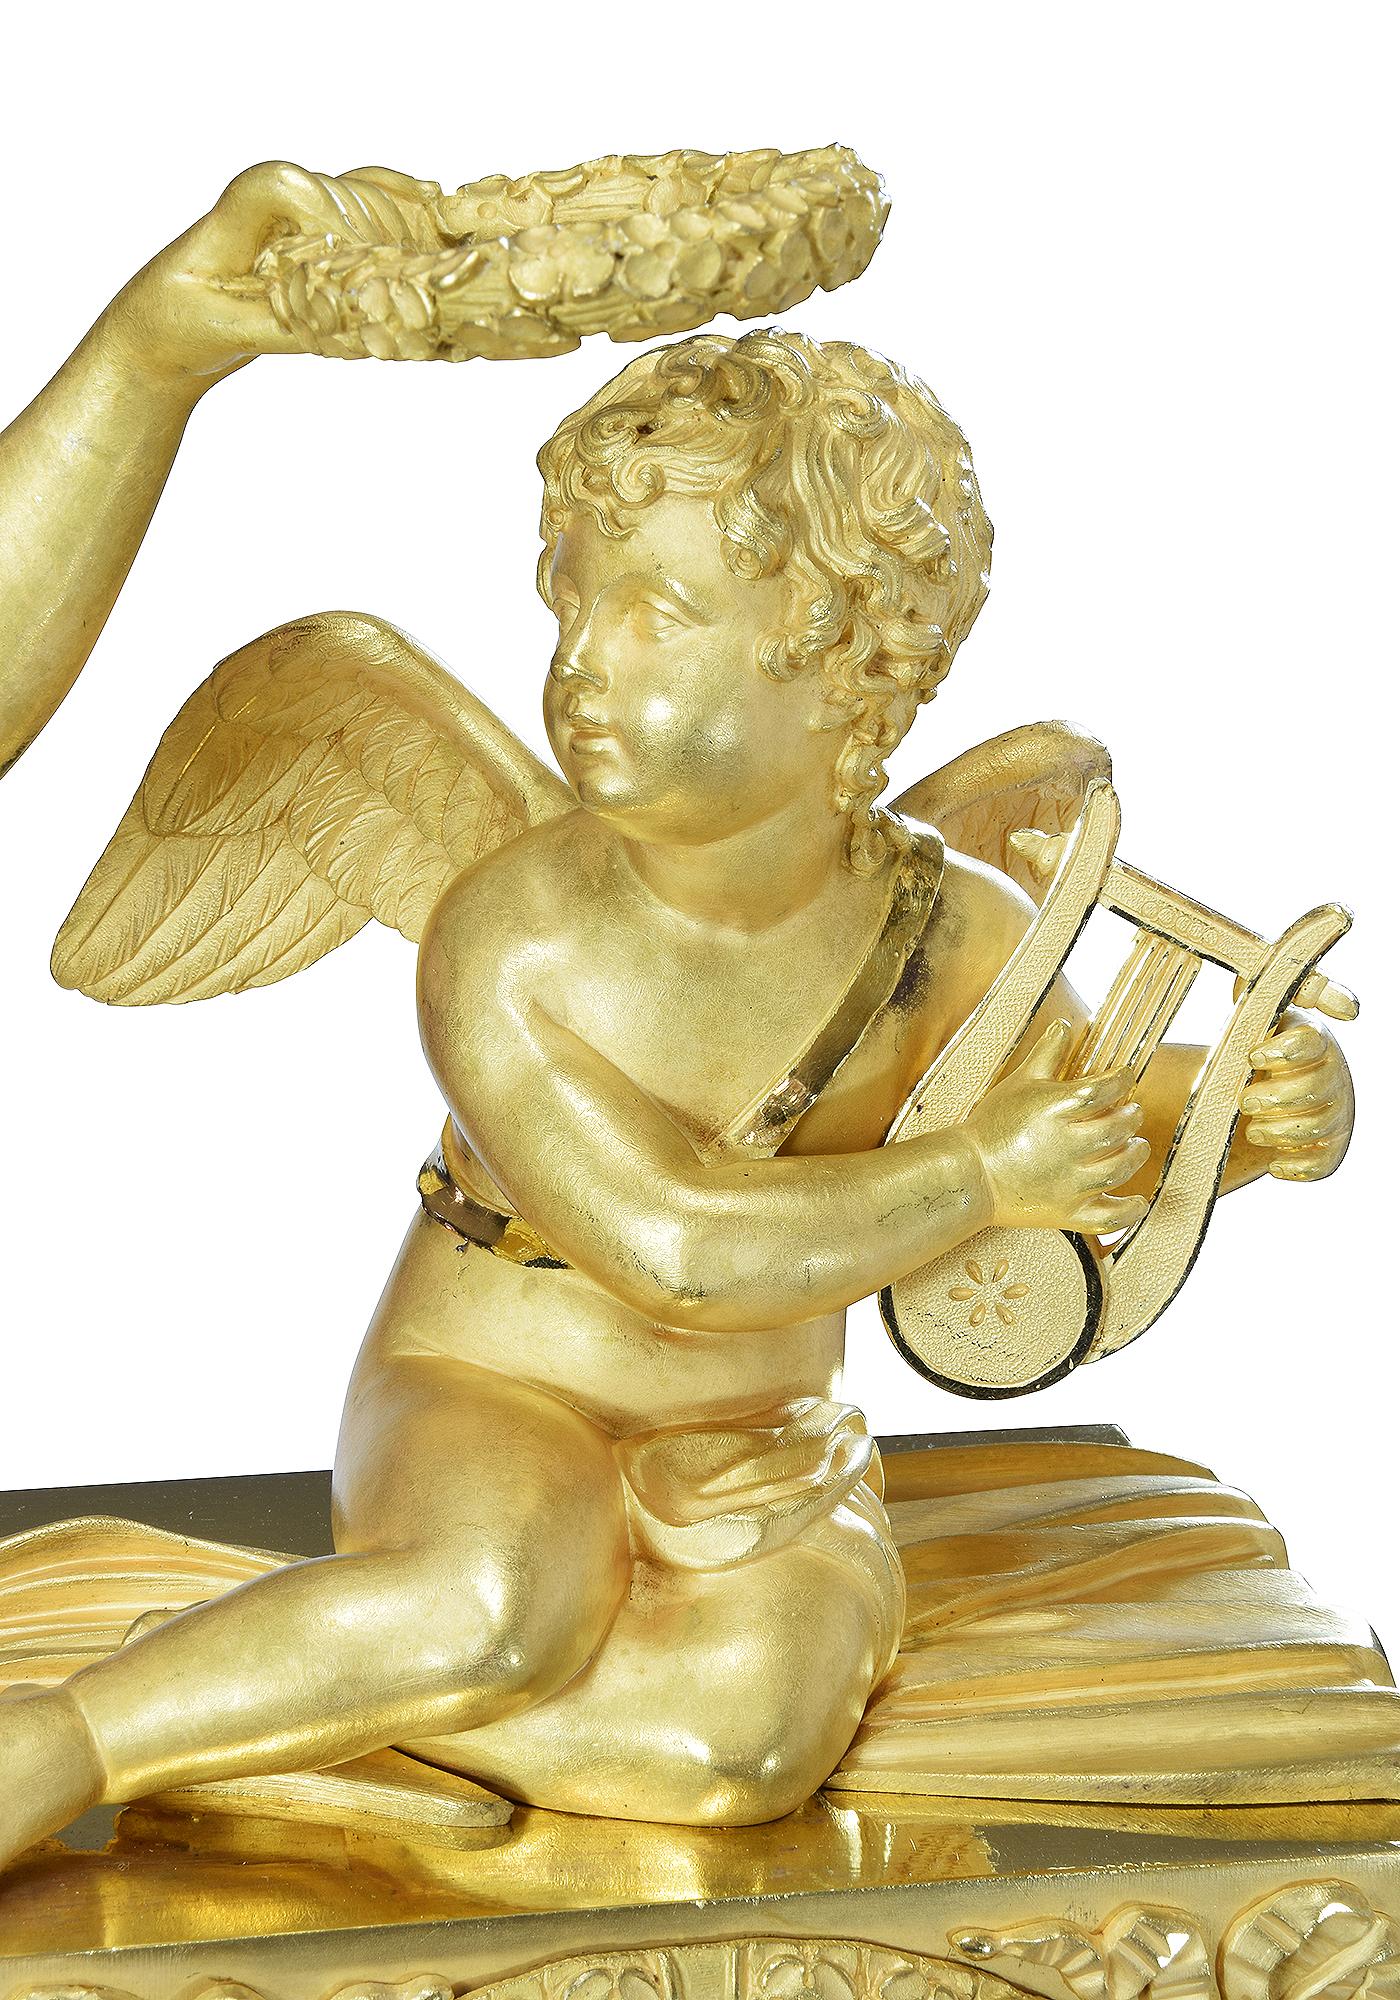 Large clock in a superb state of preservation, from the Restoration period around 1820. In mercury gilt bronze with matte and shiny gold, very good quality gilding. On the theme of the coronation of the cherub with the figure of a large antique